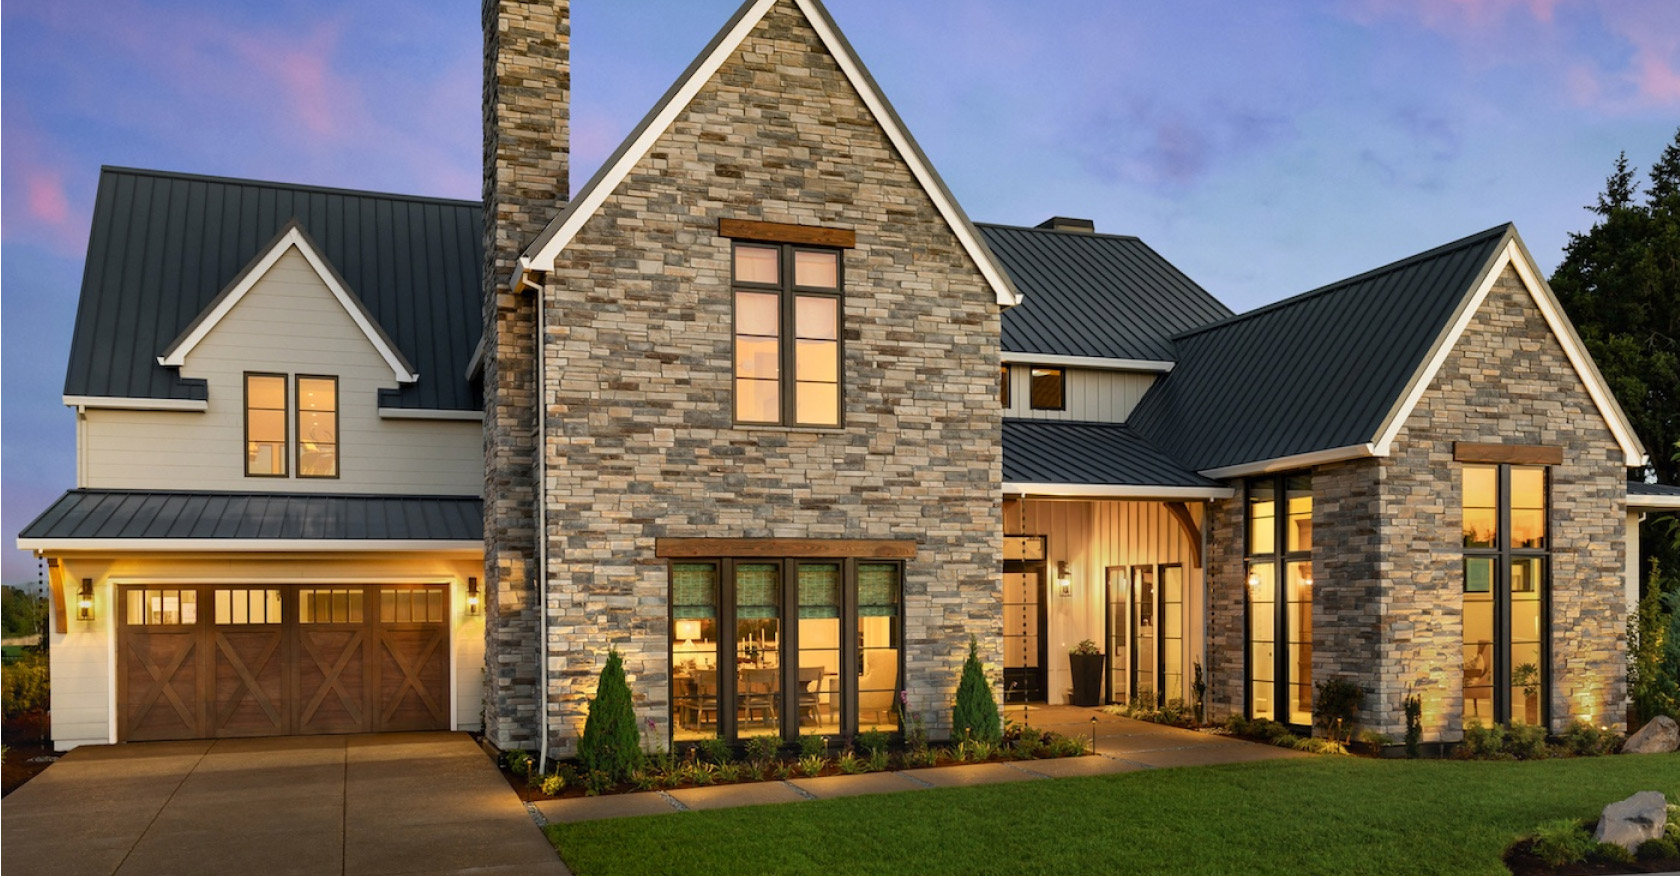 A mix of stone siding and wood siding give this home unique personality. From Mead Lumber